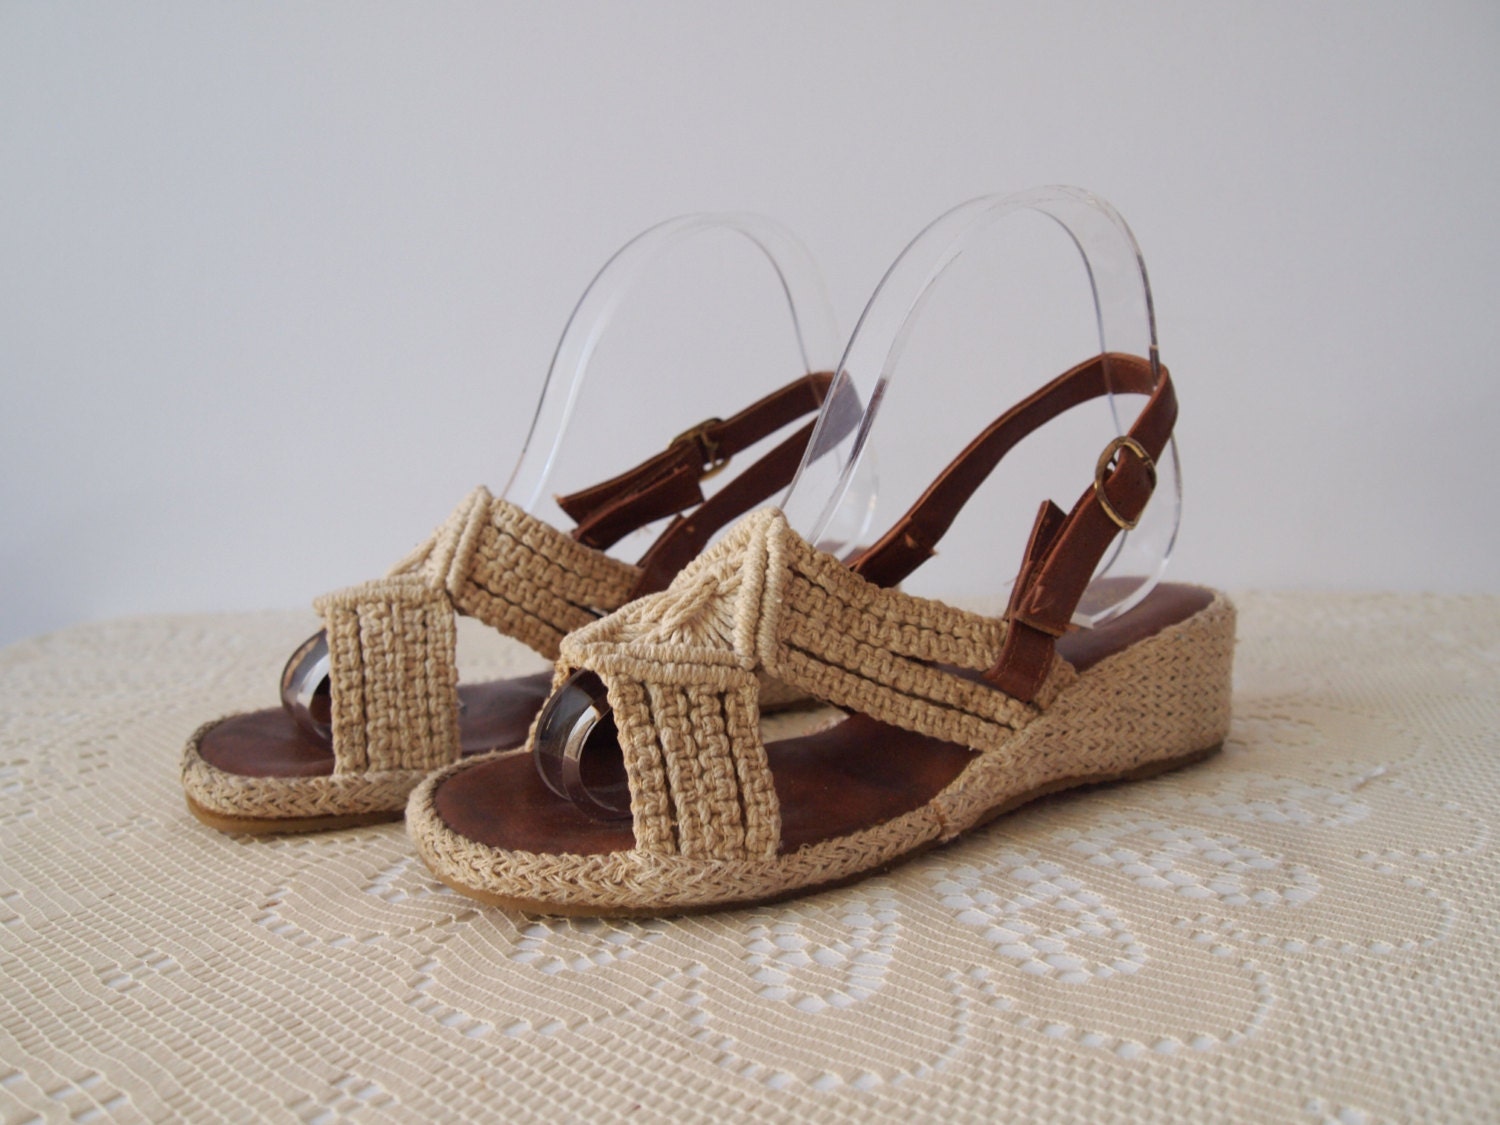 Vintage 1970s Macrame Wedge Sandals by nakedcowgirlvintage